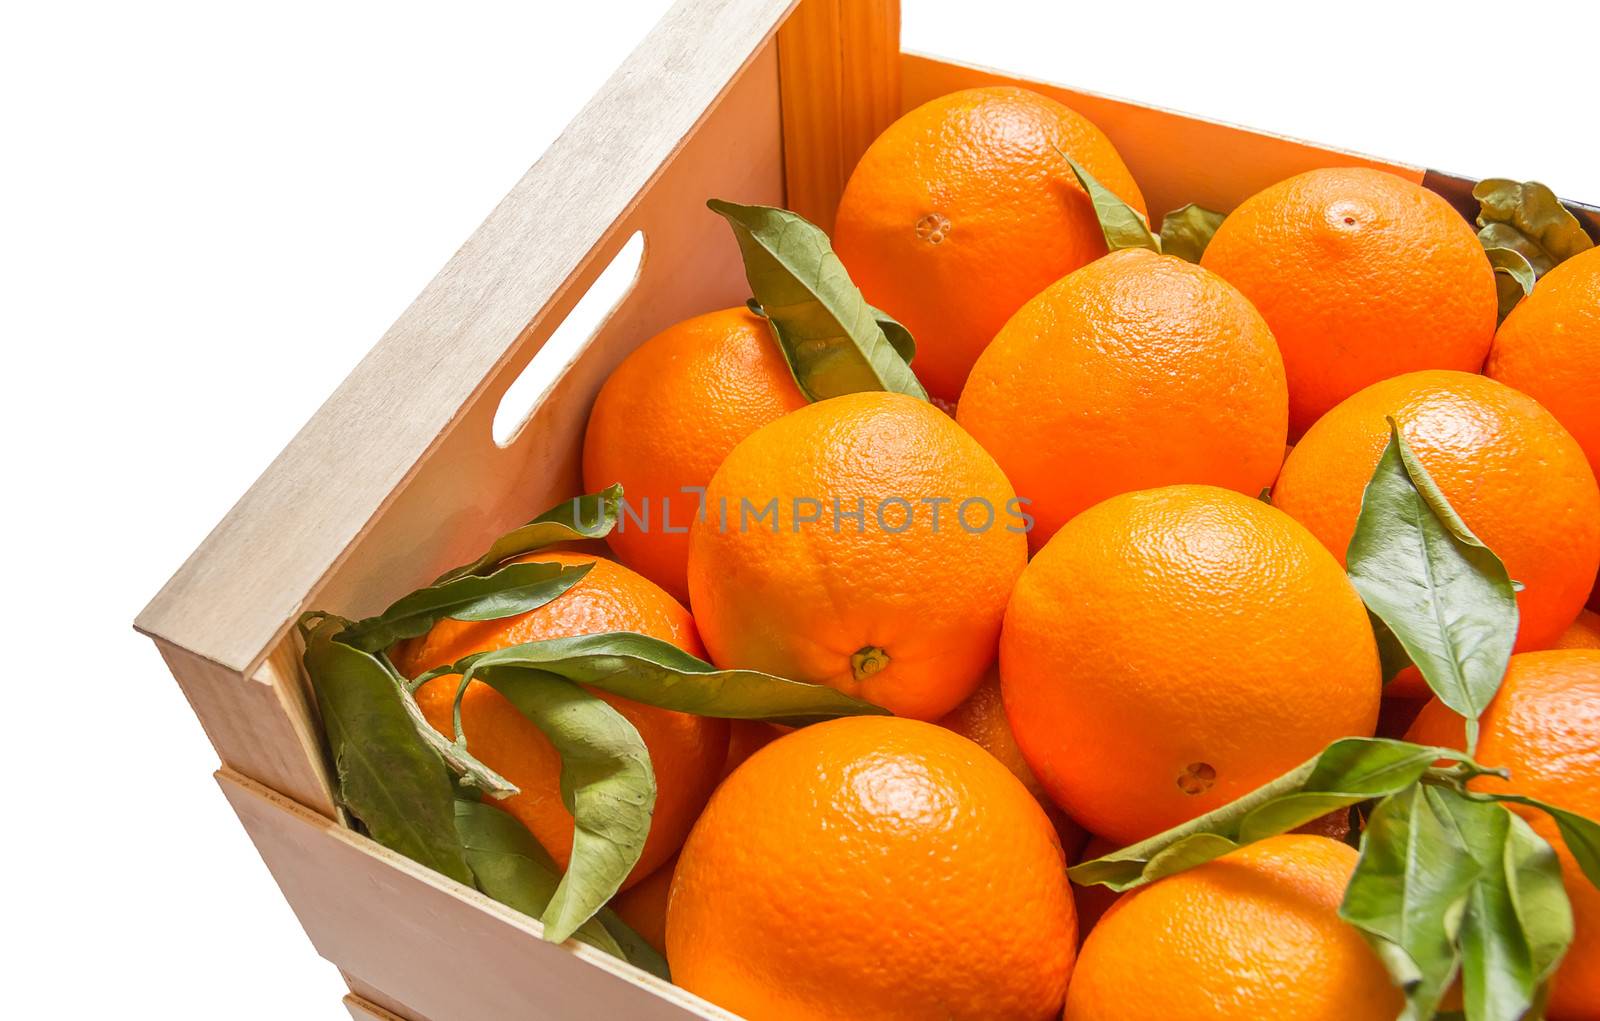 Wood box of valencian oranges on white background by doble.d